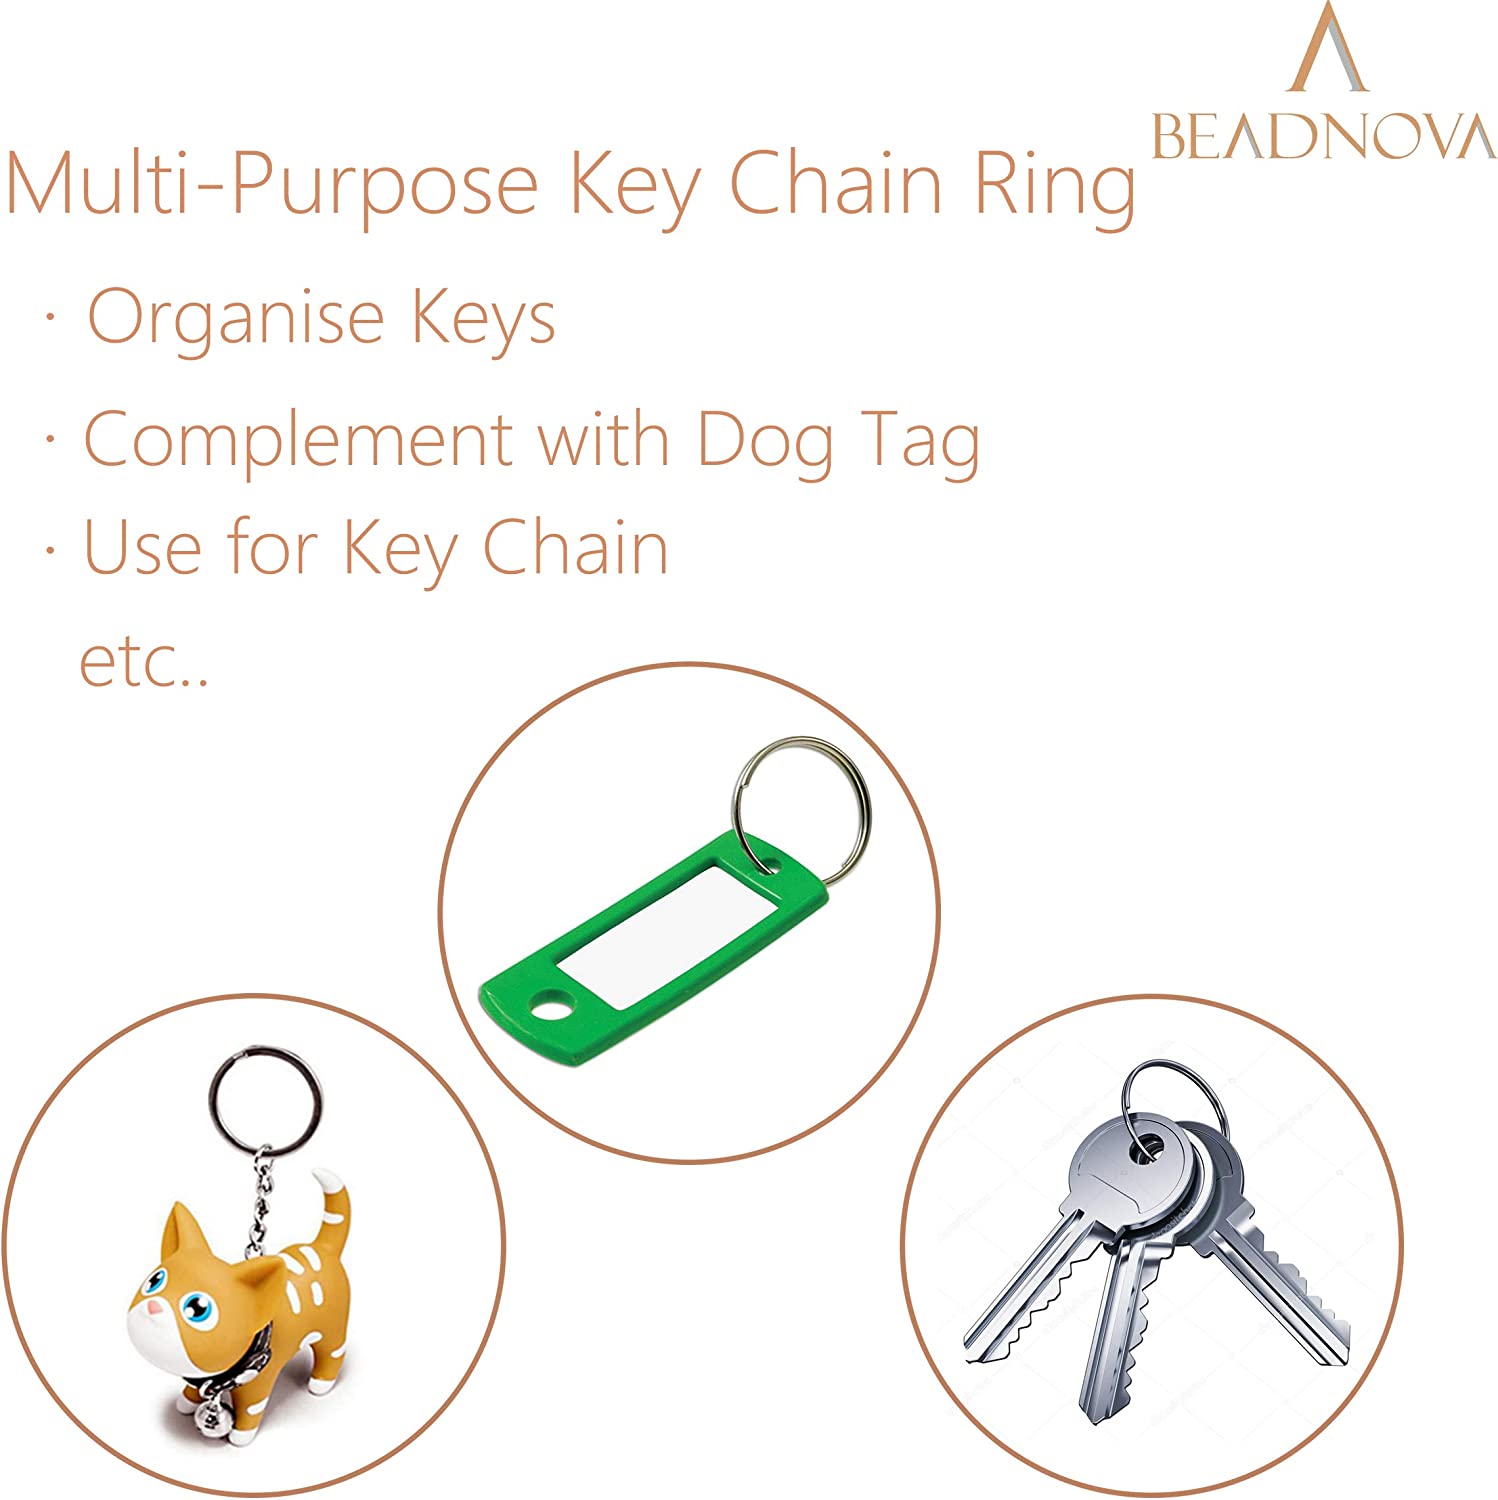 Key Rings for Keychains Split Key Ring Key Chains Rings for Keys and Dog  Tags (20mm, 100pcs) 